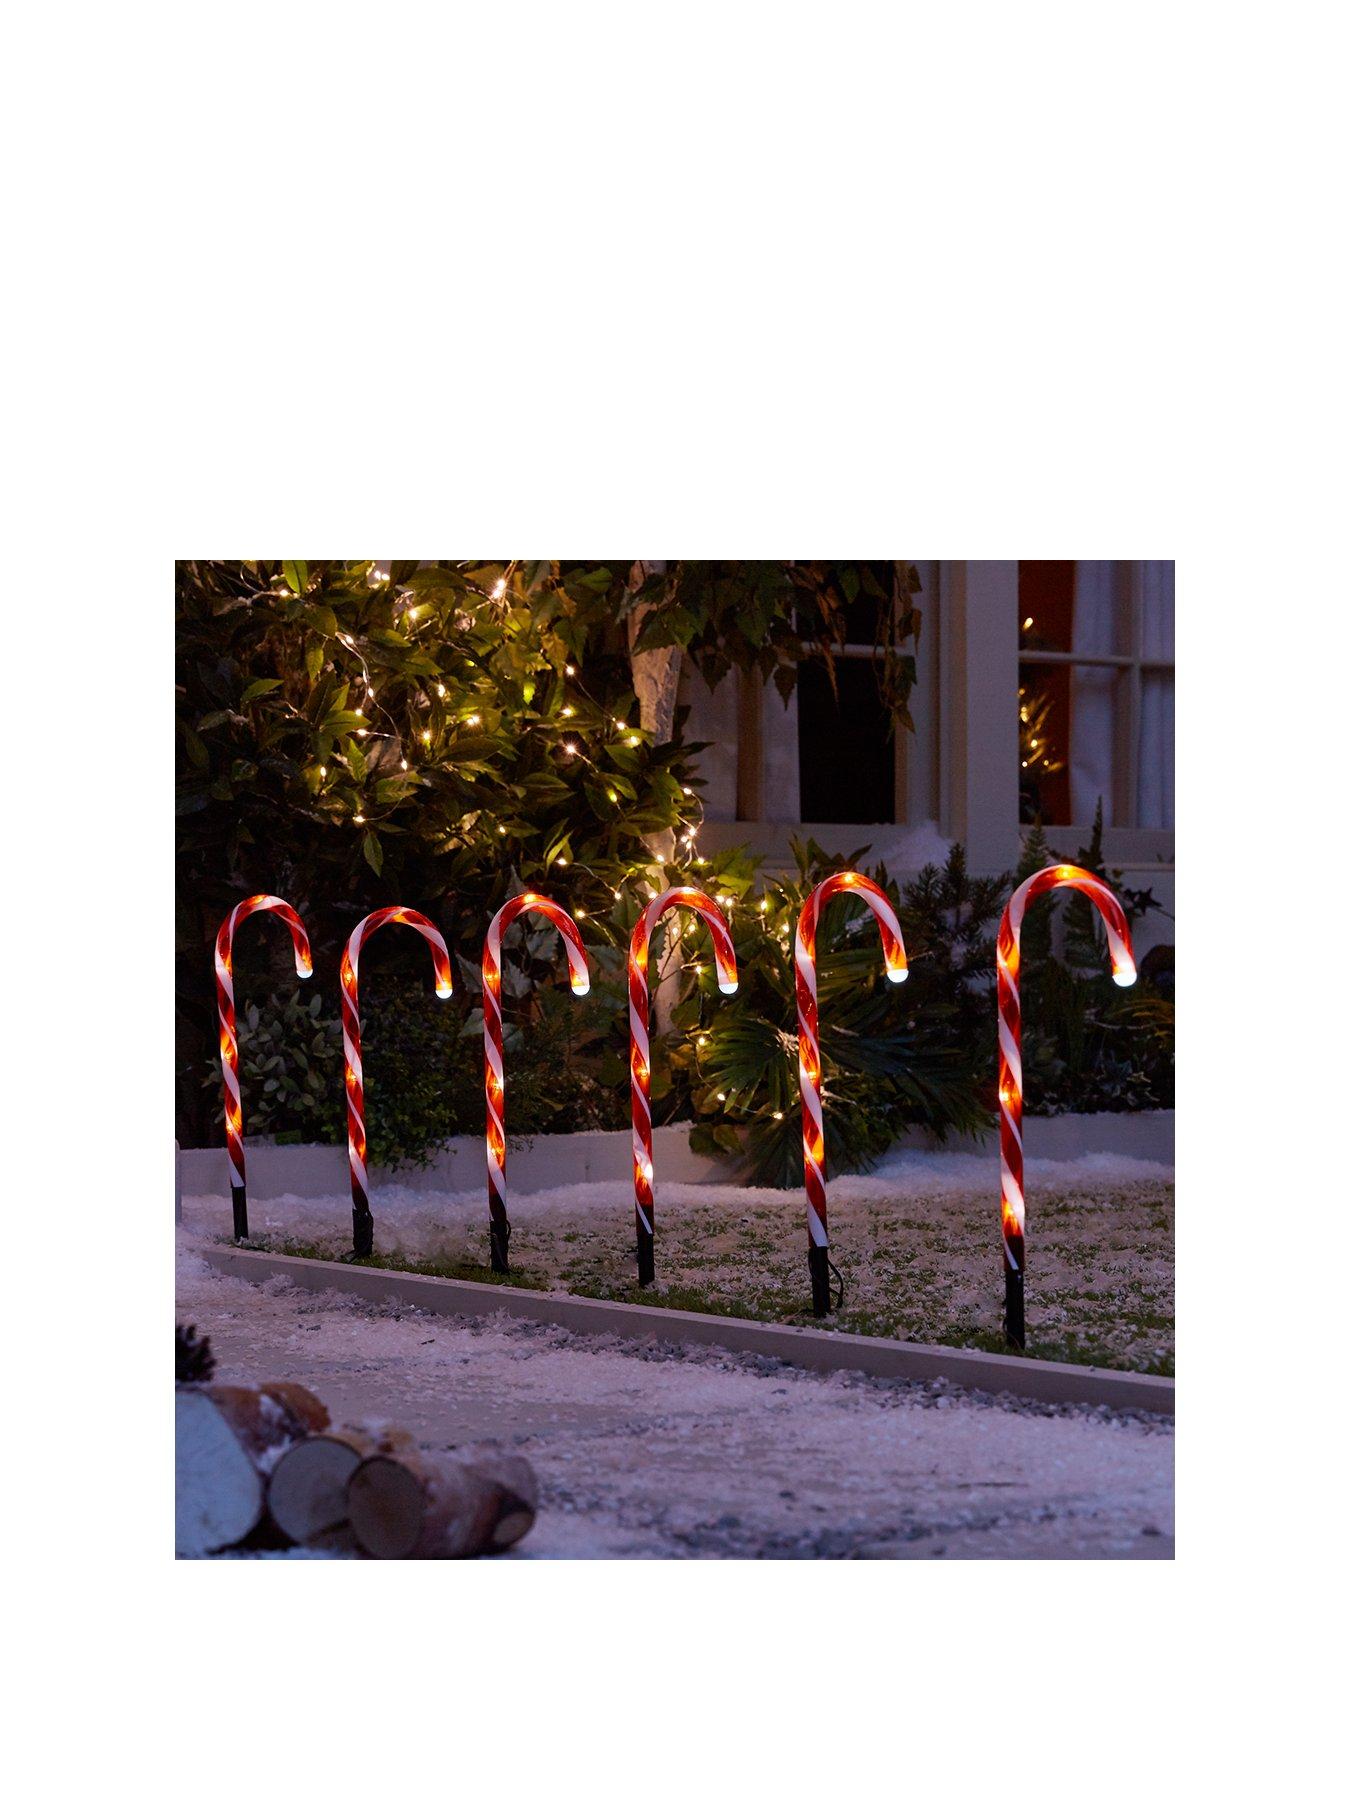 Details about   Changeable LED Christmas Lights Home Decoration Colorful Night Lamp High Quality 